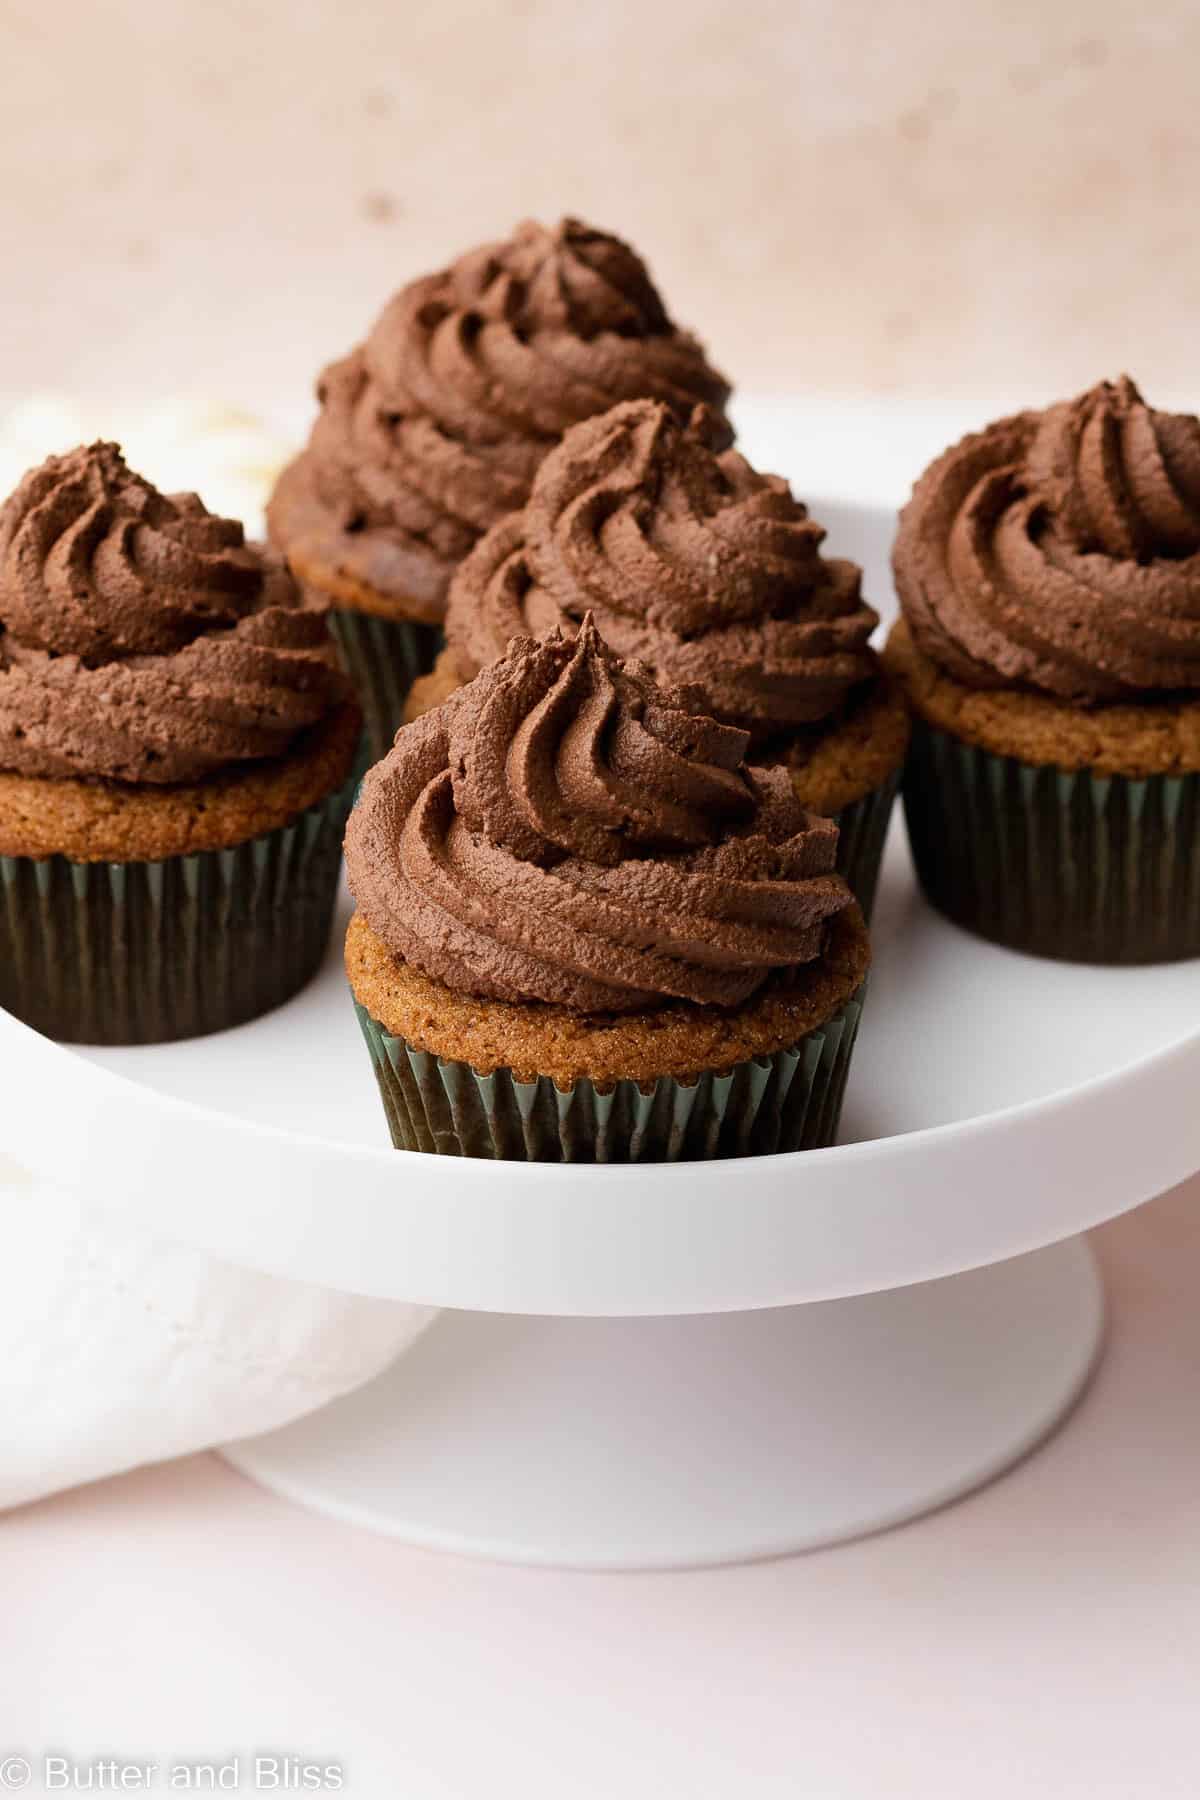 Plate of pumpkin cupcakes topped with whipped chocolate frosting.